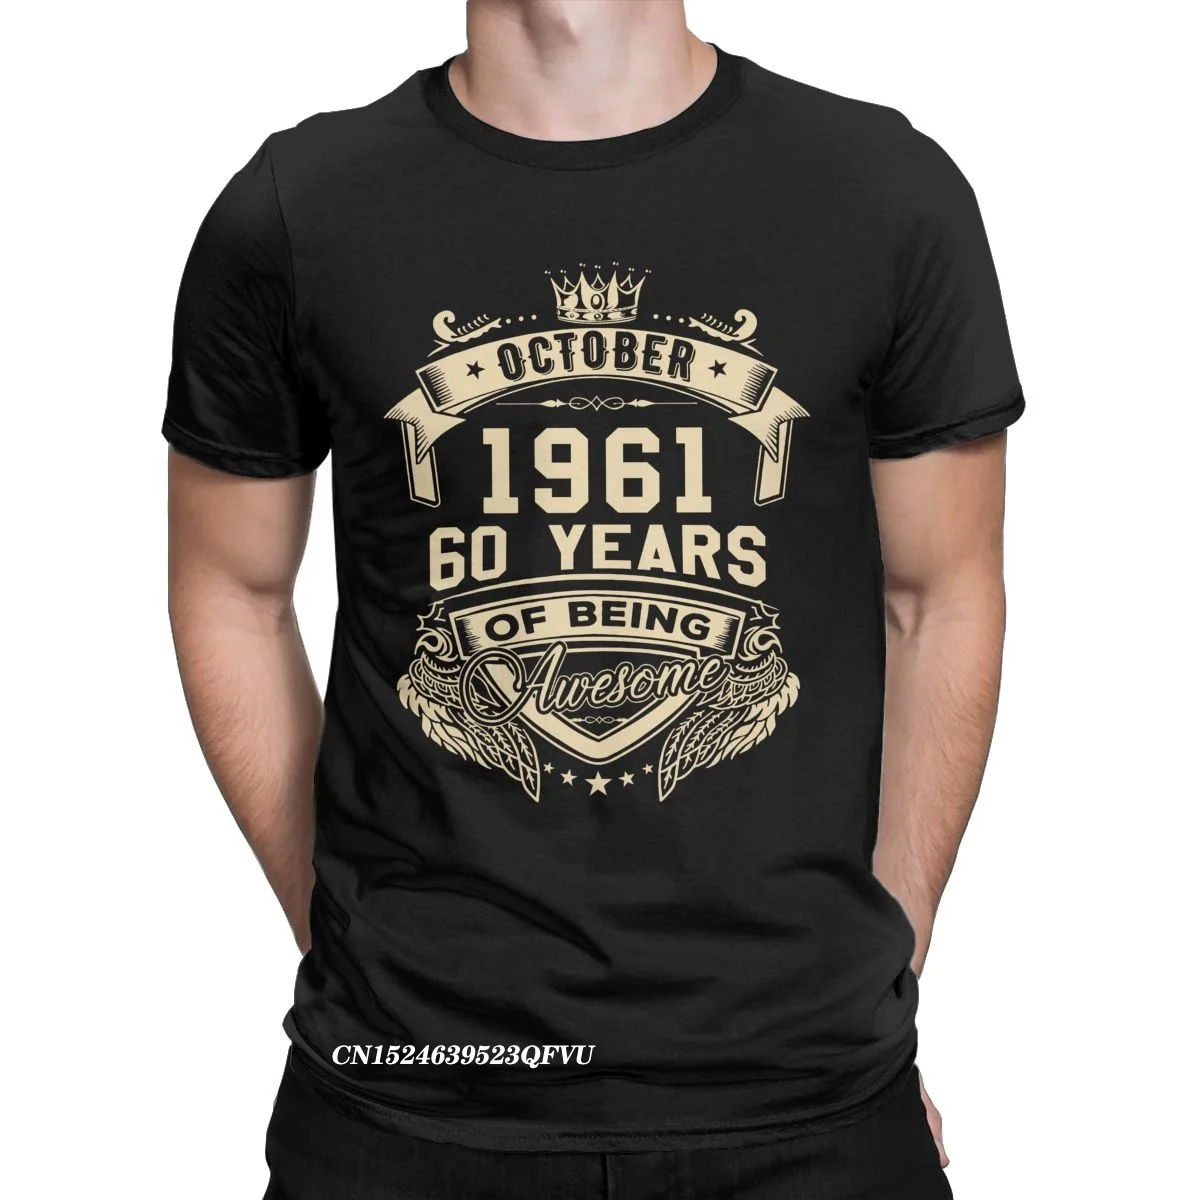 

Born In October 1961 60 Years Of Being Awesome Limited Tee Shirt For Men Premium Cotton Tees Round Neck Tops T Shirts Printed